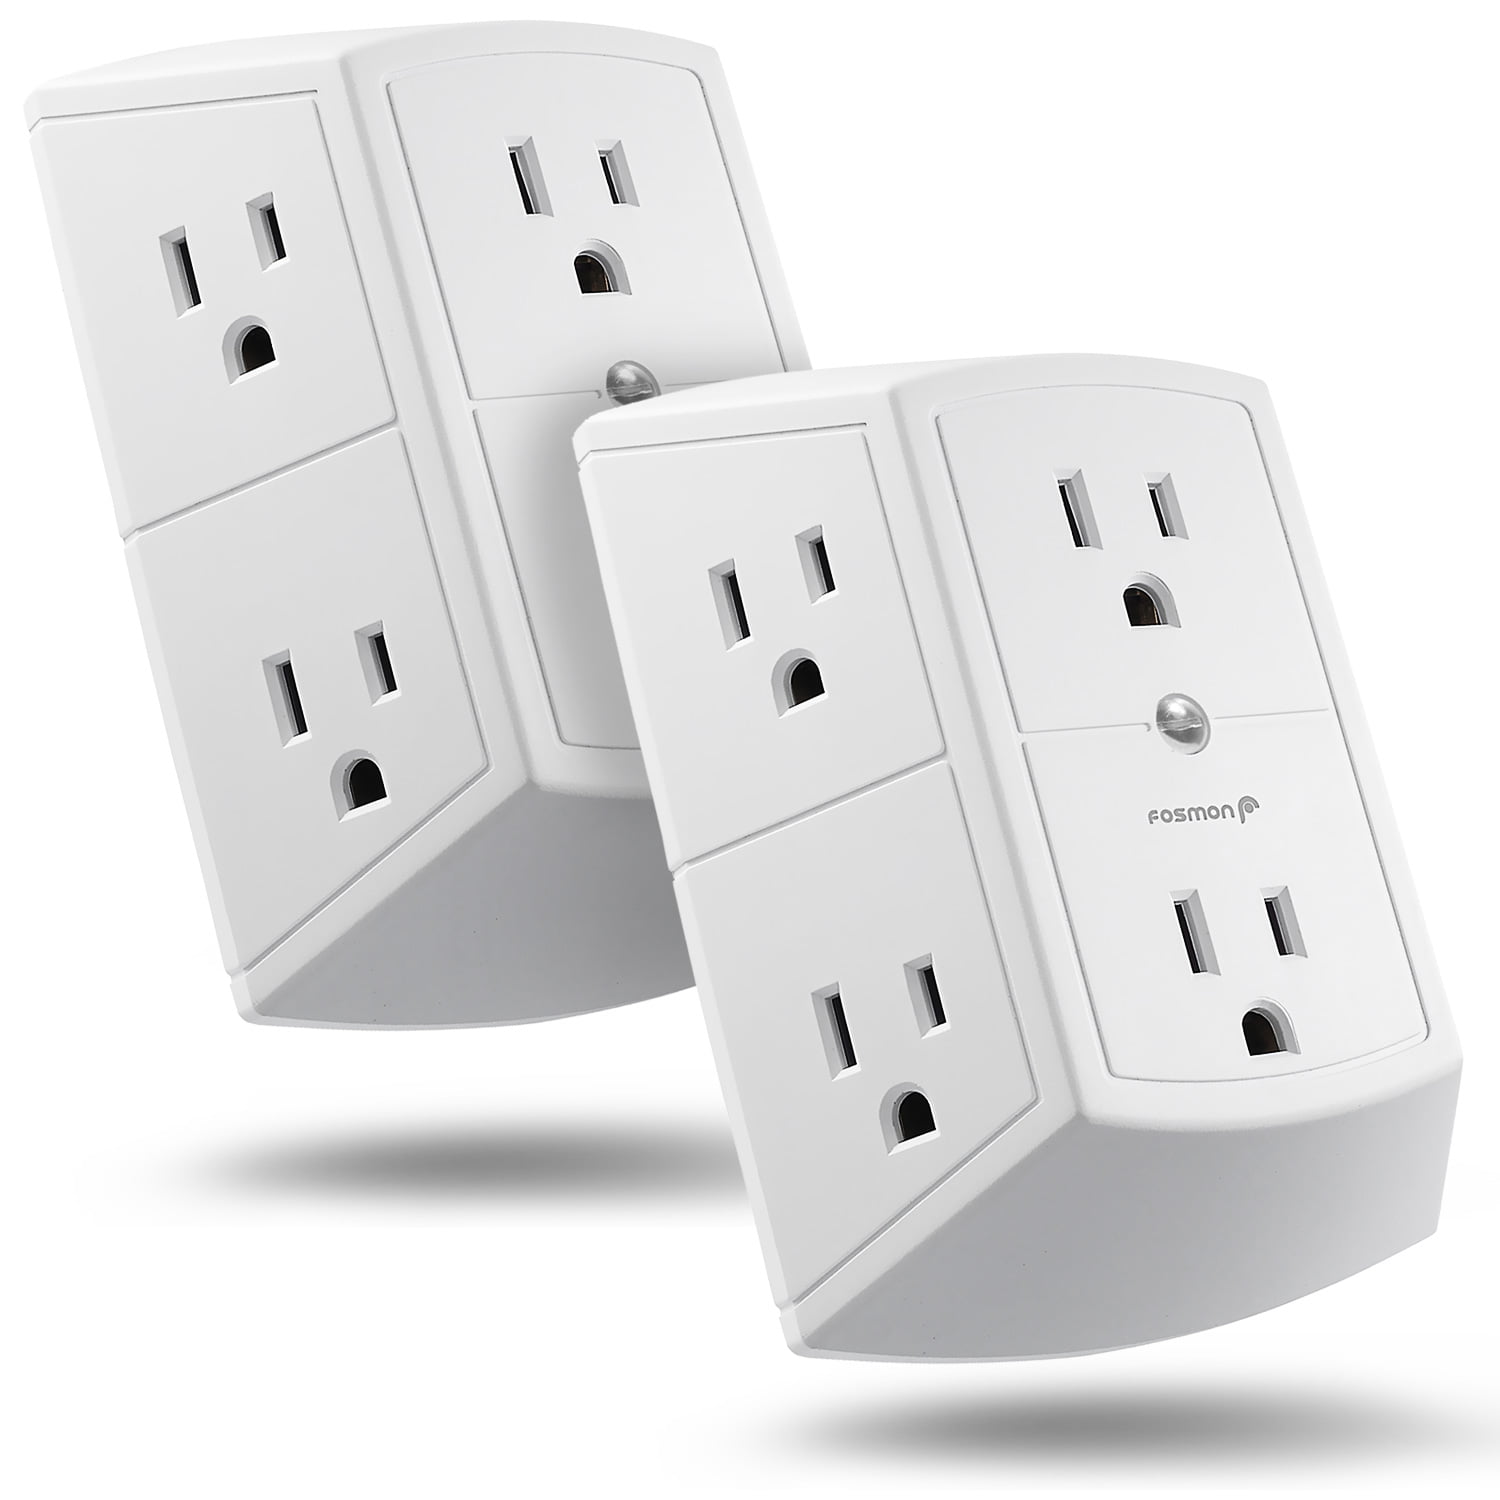 2X Grounded 3 Outlet Triple AC Wall Plug Power Splitter 3-Way Electric Adapter 